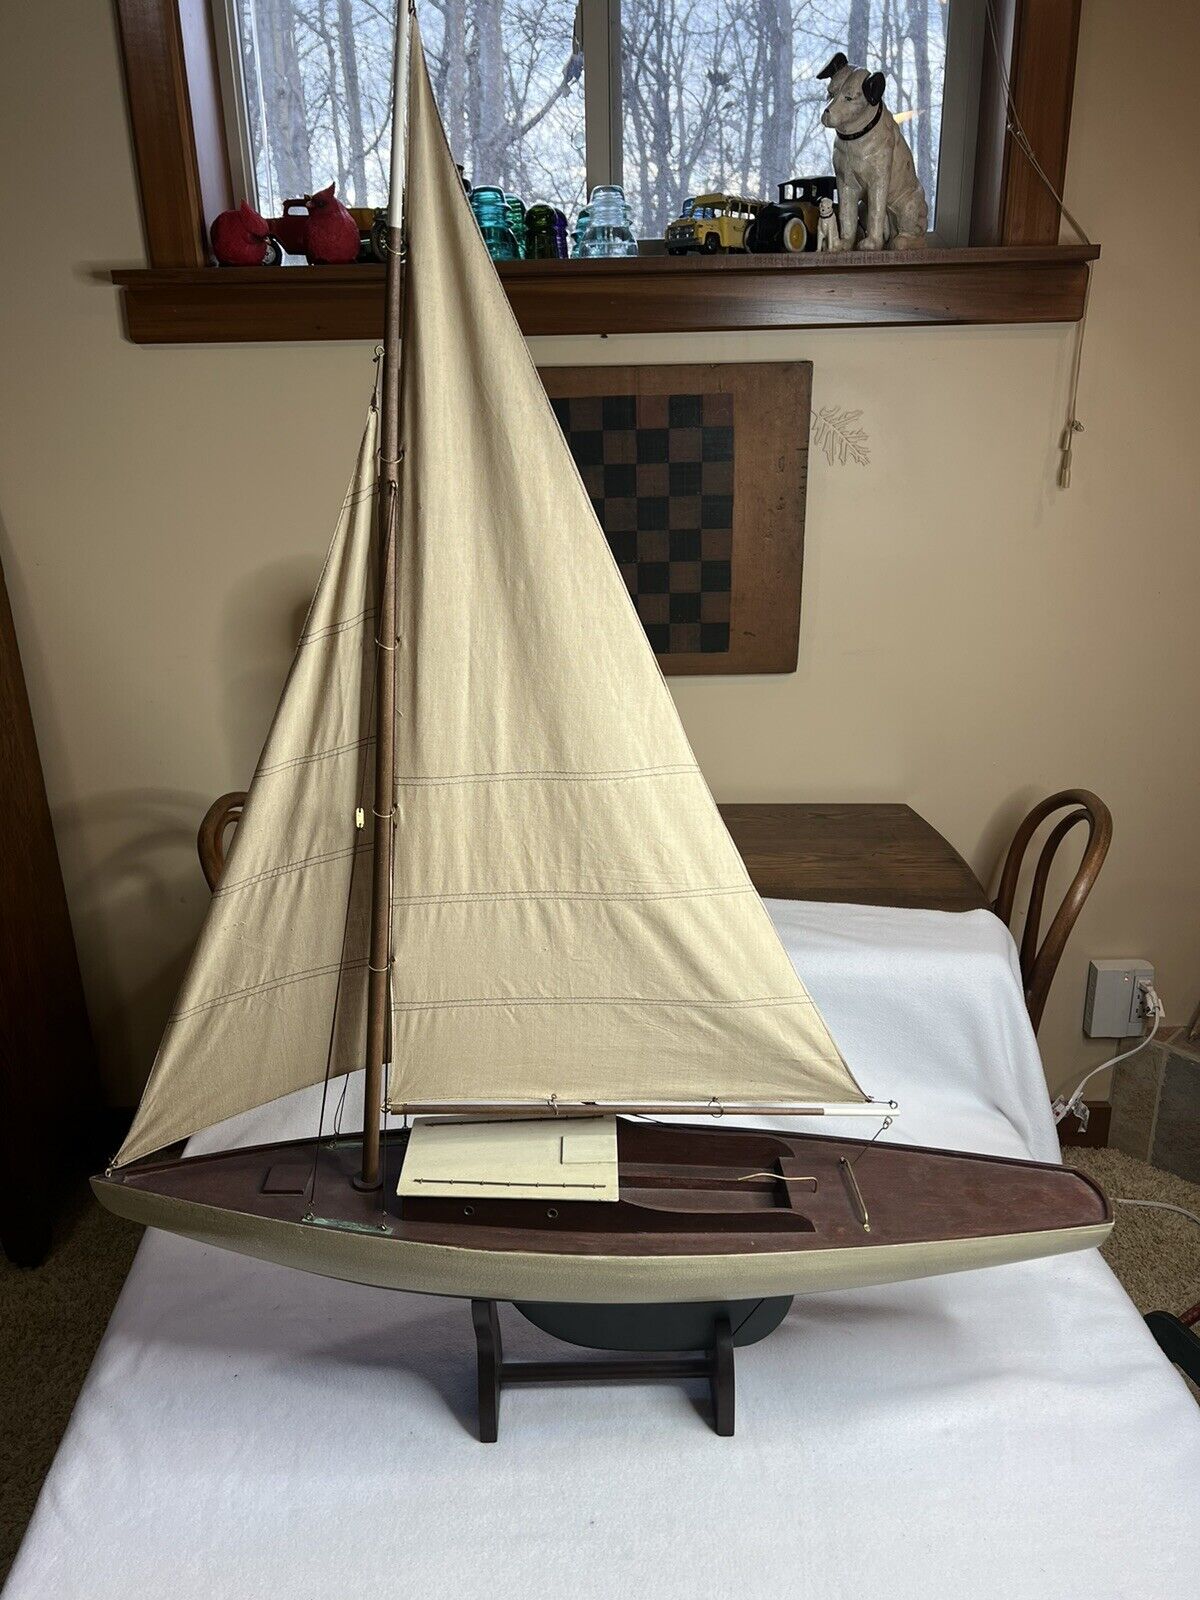 Vintage Large Pond Boat Hollow Wood Sailing Yacht W/Stand - Two Sails 36”L, 47”T